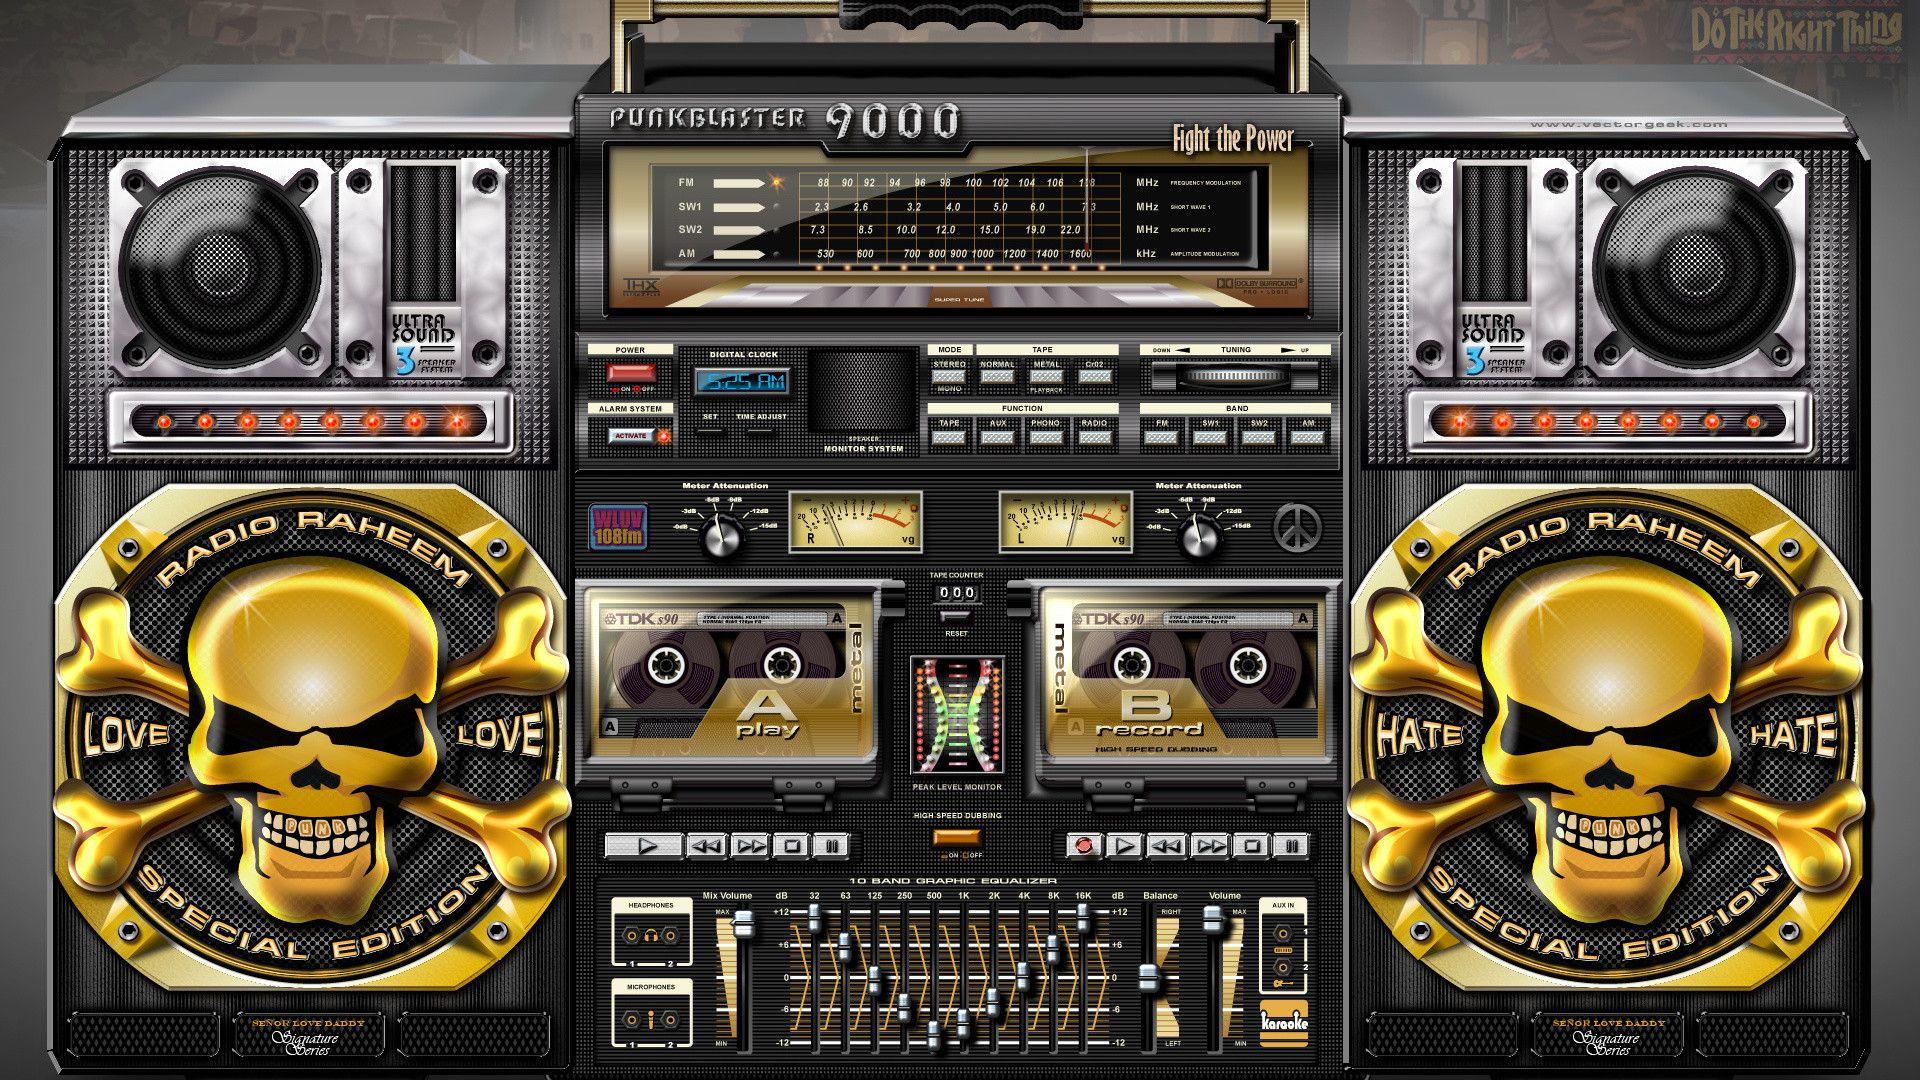 Boombox Wallpaper 70 images